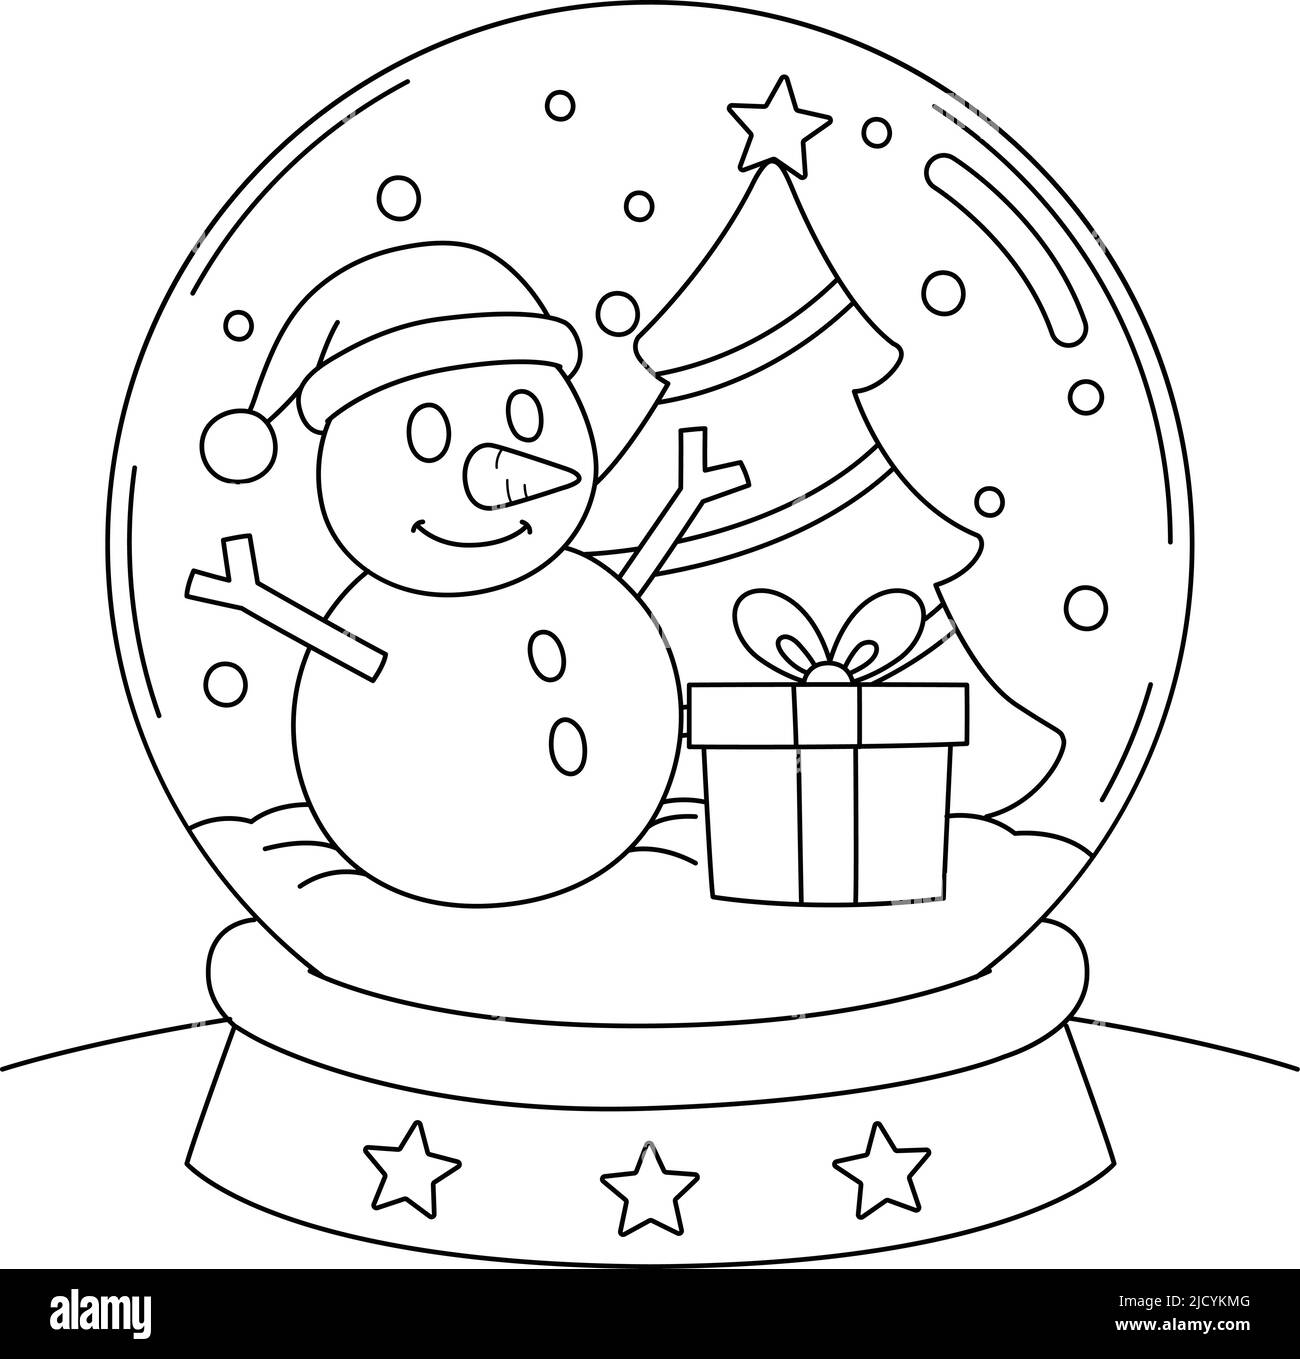 Christmas snow globe coloring page for kids stock vector image art